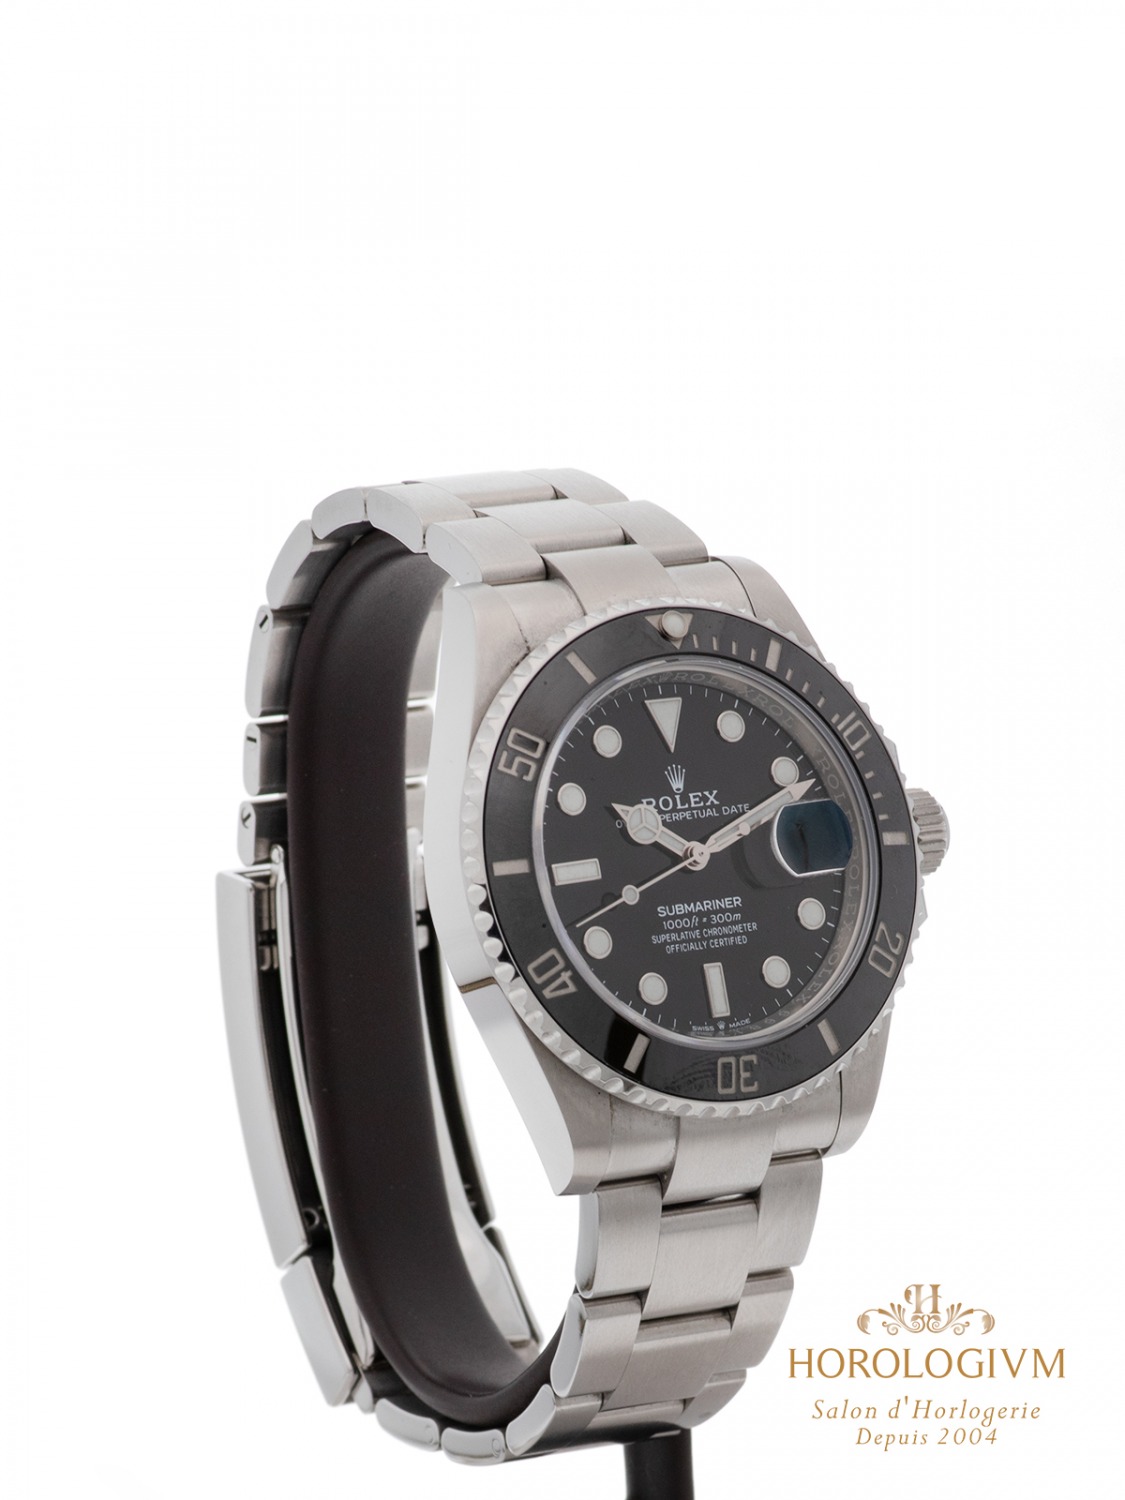 Rolex Oyster Perpetual Date Submariner 41MM Ref. 126610LN watch, silver (case) and silver & black cerachrom / ceramic (bezel)